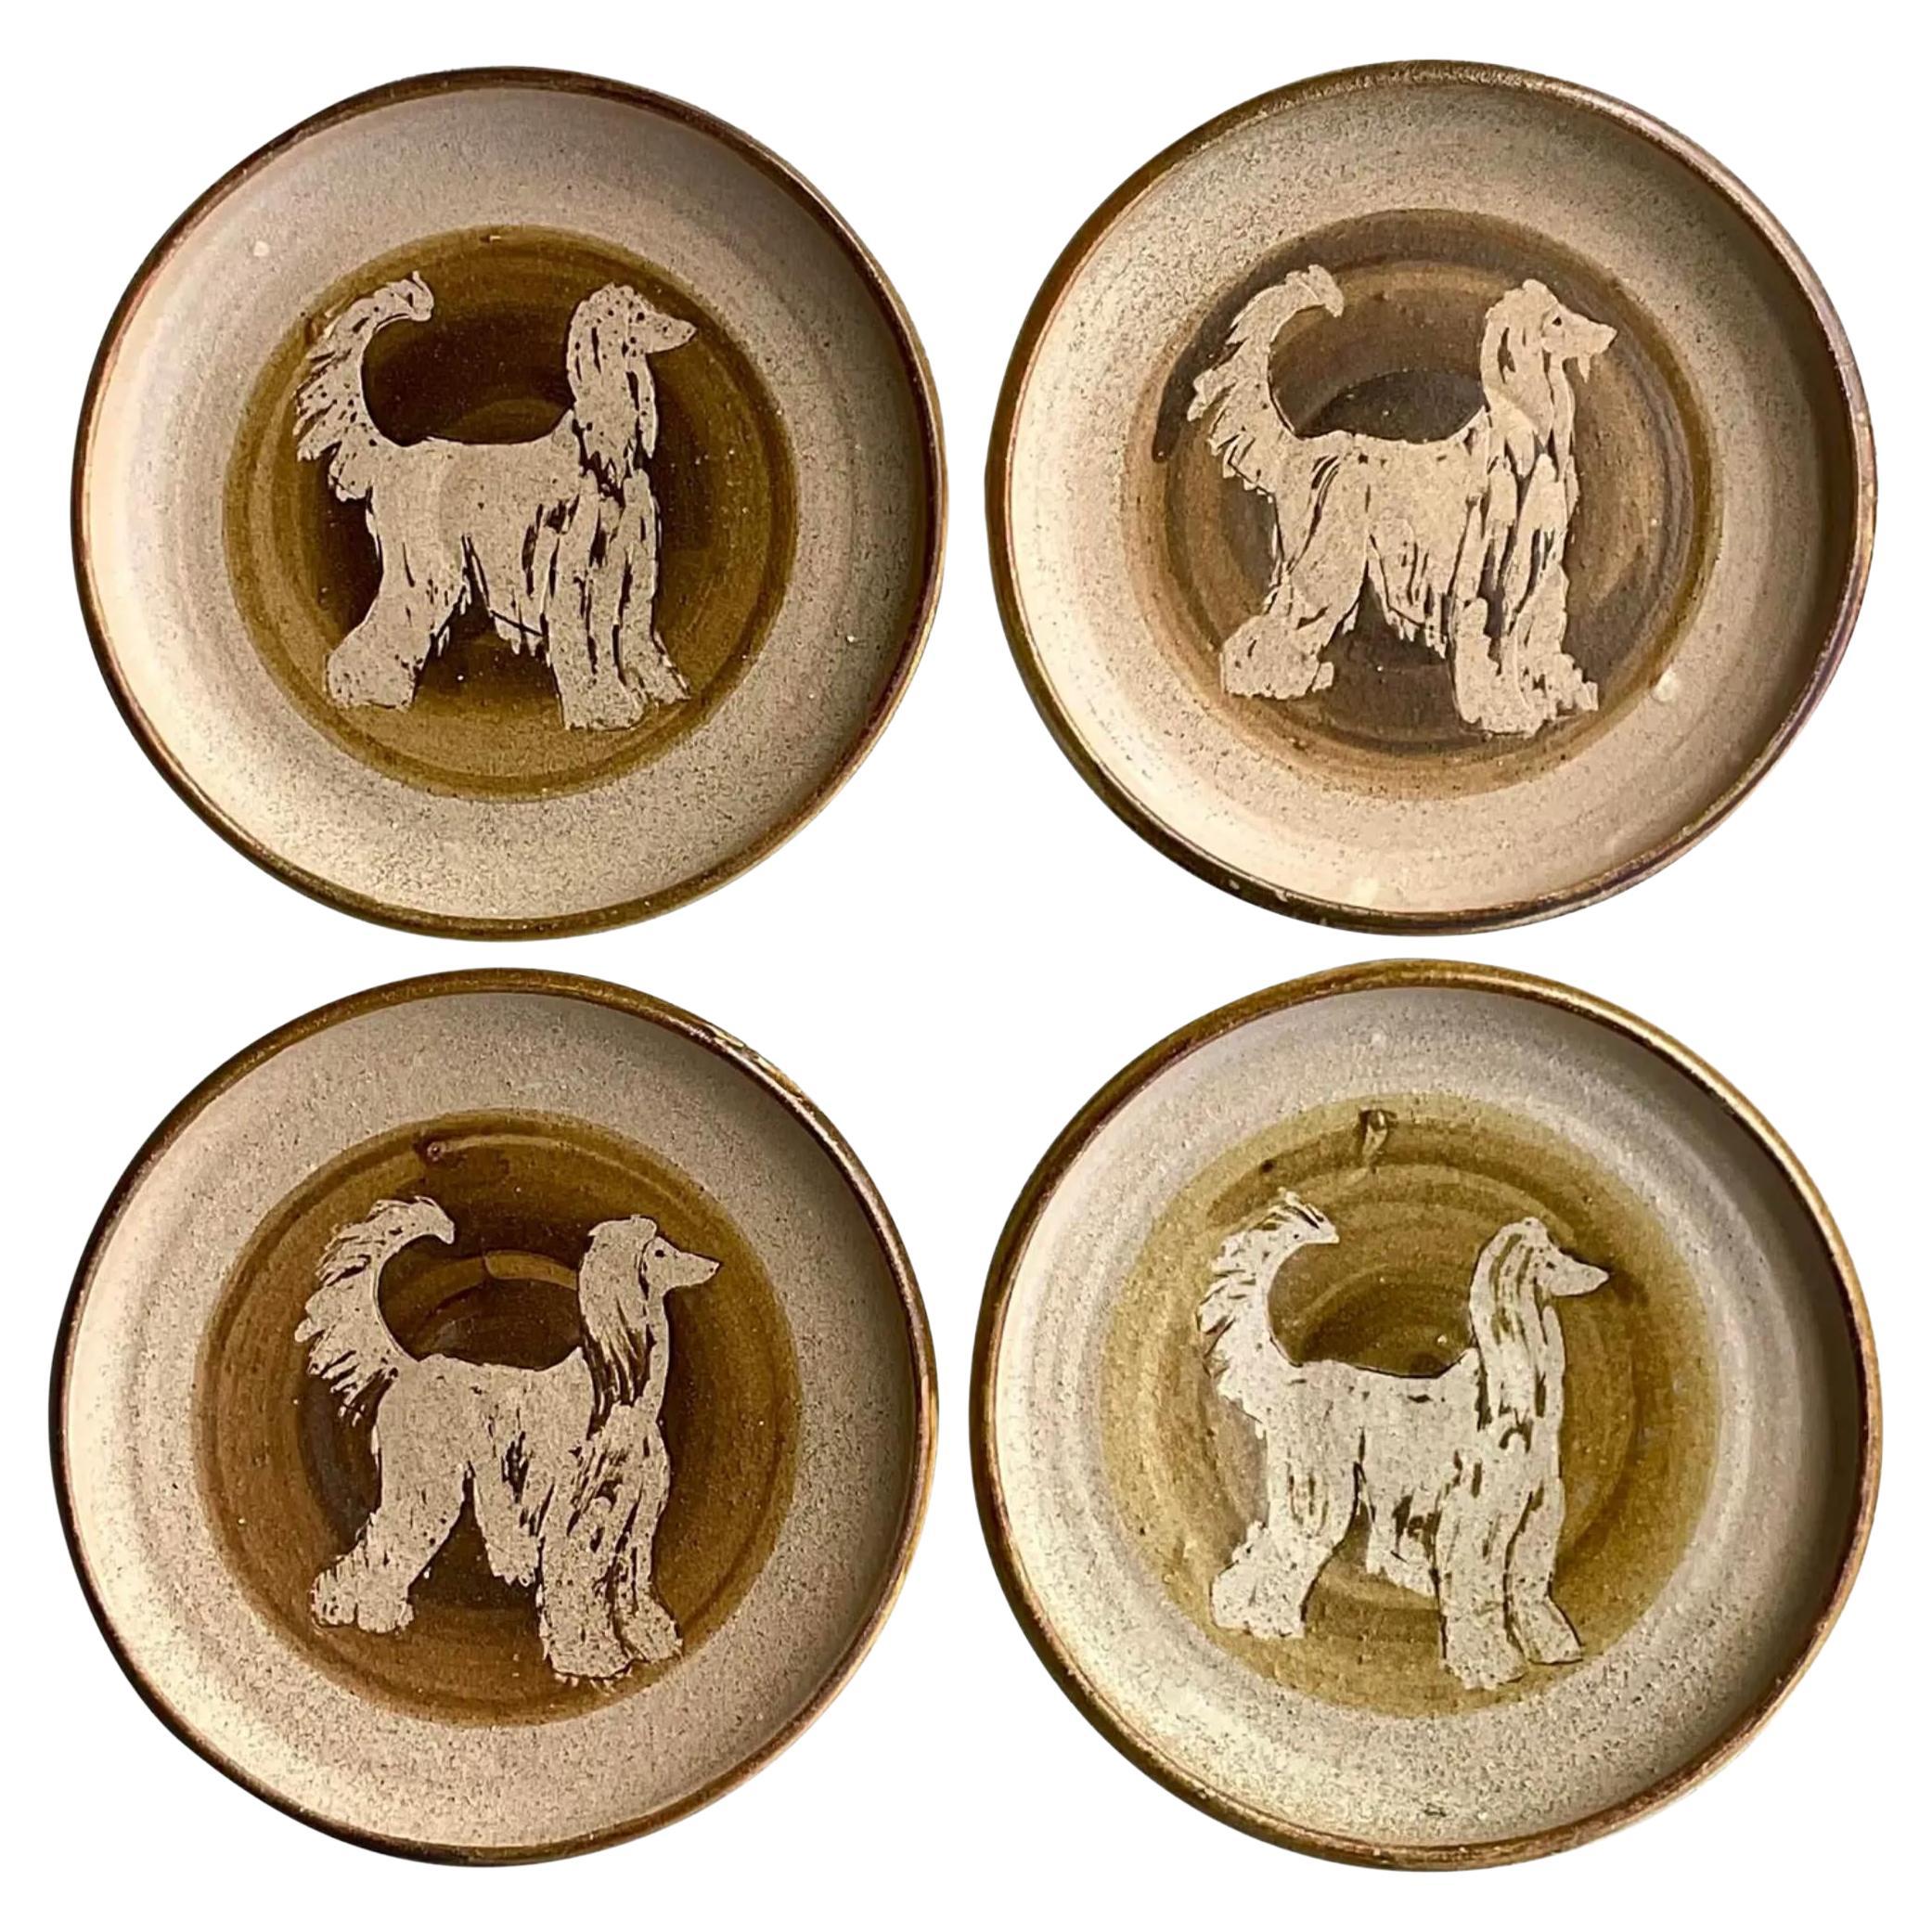 Vintage Boho Signed Studio Pottery Plates With Afghan Dogs - Set of 4